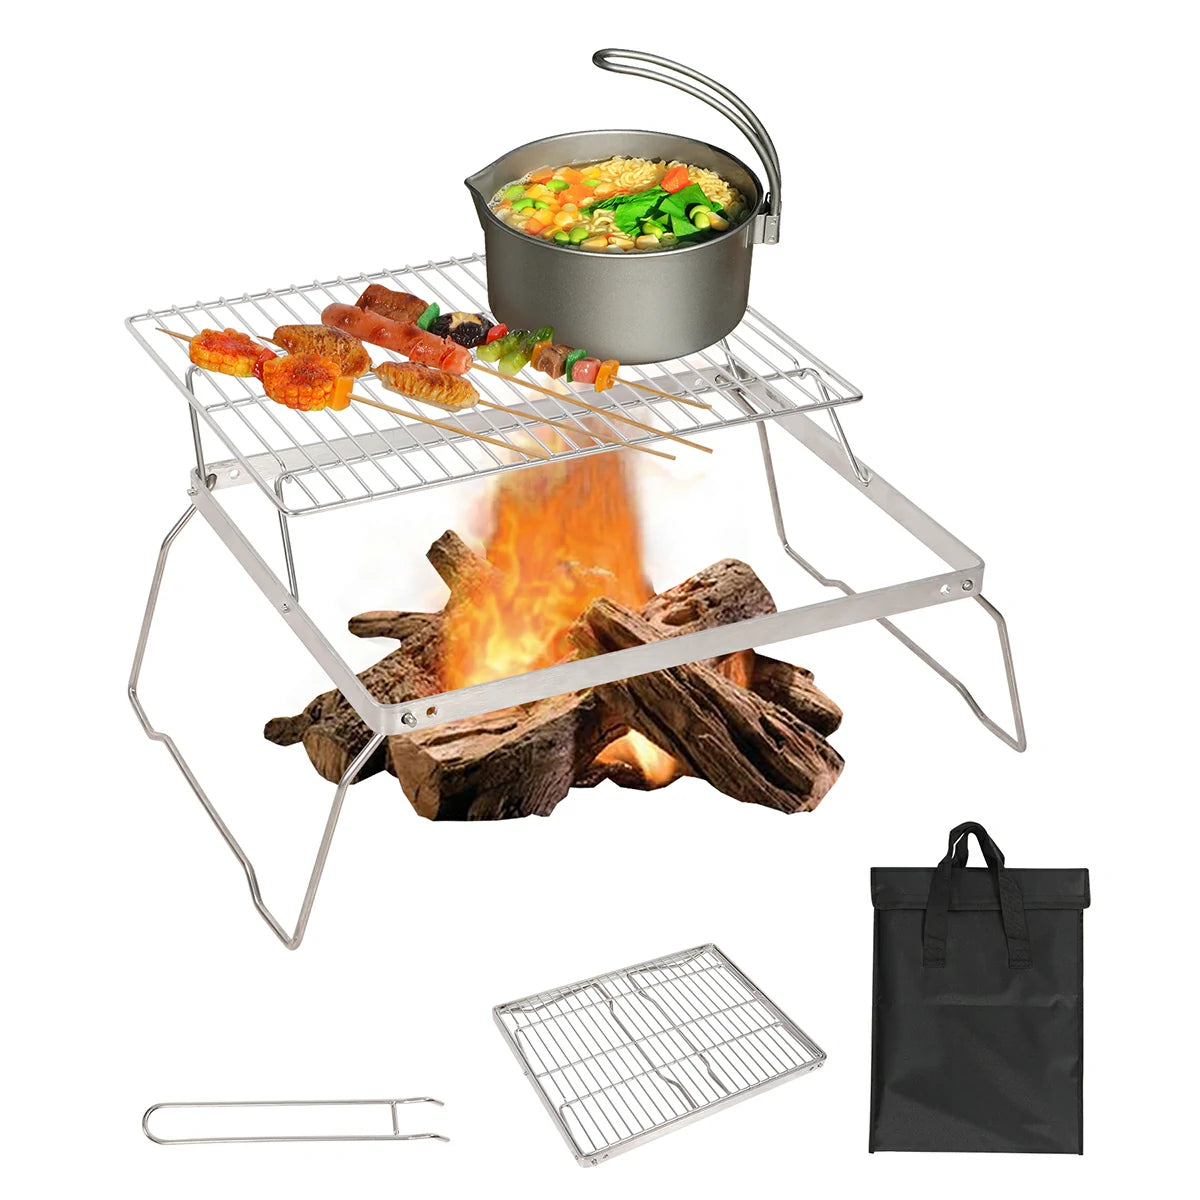 REDCAMP Folding Campfire Grill Grate With Translational Cooking Racks